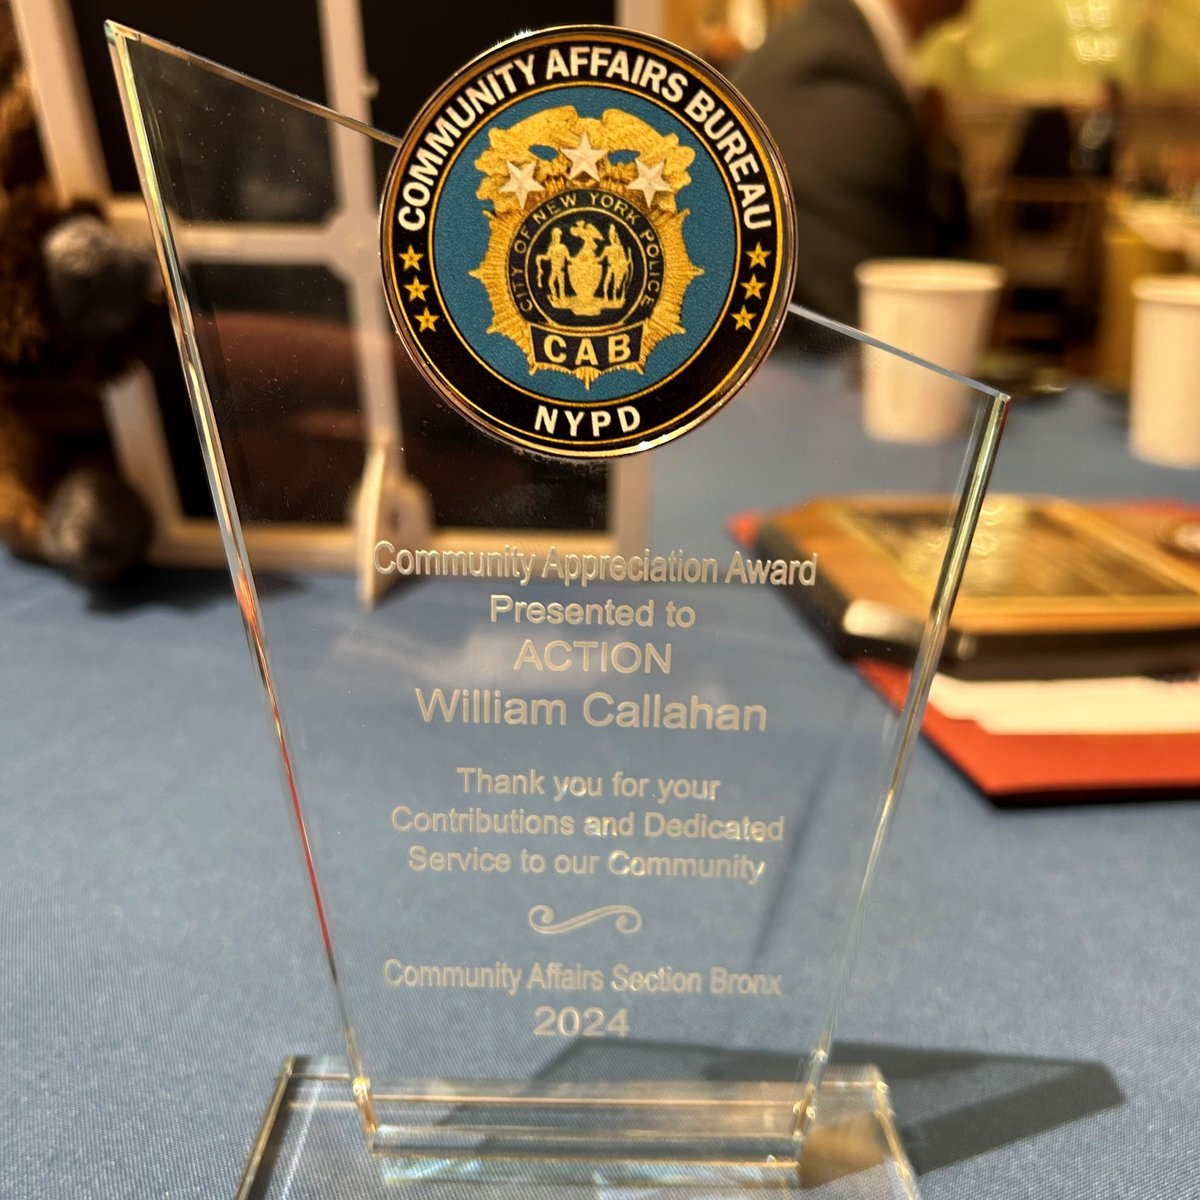 We are so proud of our very own Bill Callahan as he was honored by the Bronx NYPD Community Partners.
Congratulations Bill, keep up the great work!
#InterstateWaste #InterstateWasteServices #ActionEnvironmental #ActionCarting #Bronx #BX #NYC #NewYorkCity #NYPD #Honoree